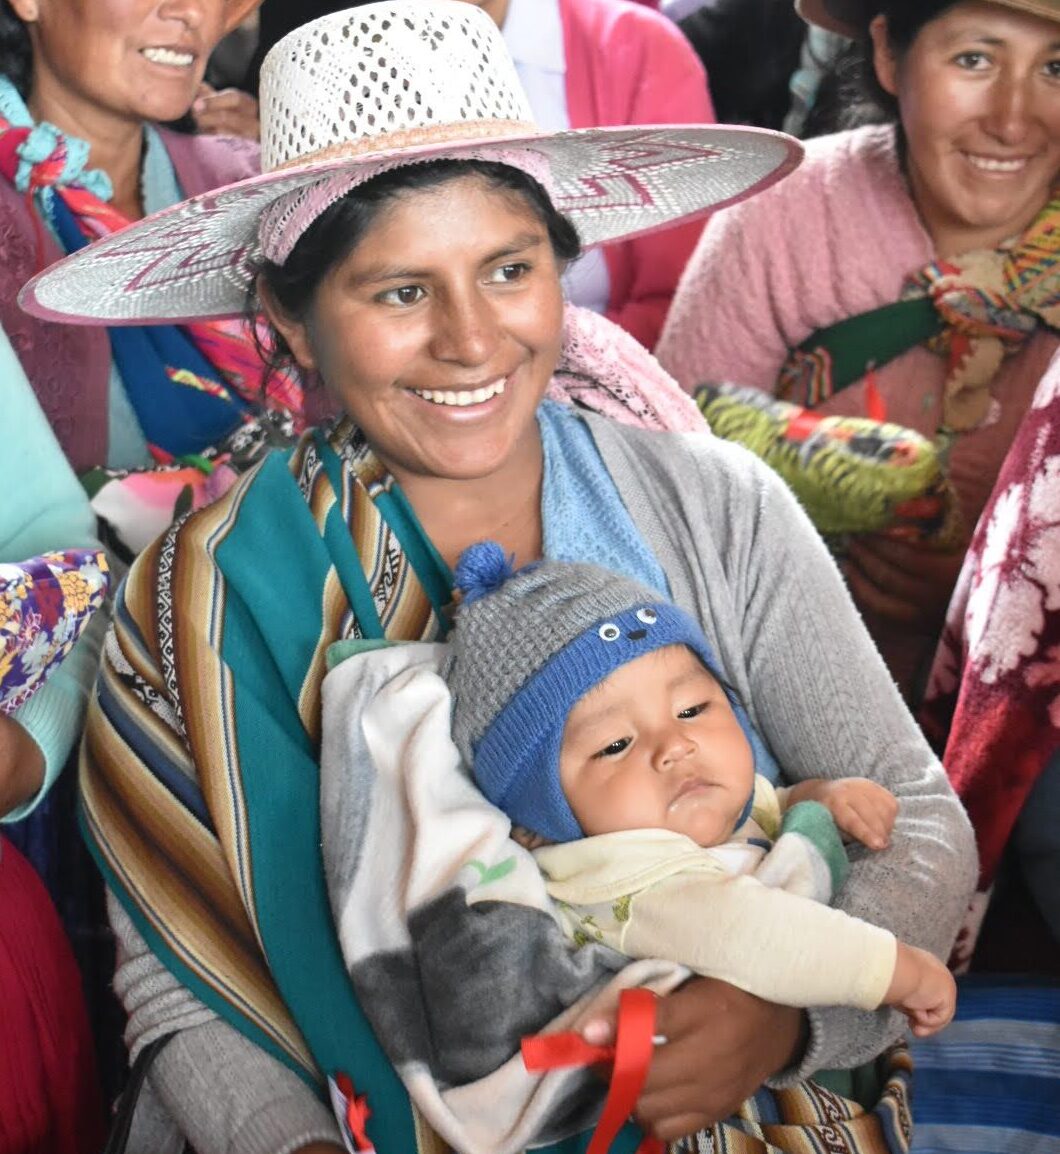 Mother in traditional Bolivian clothing holder her child.